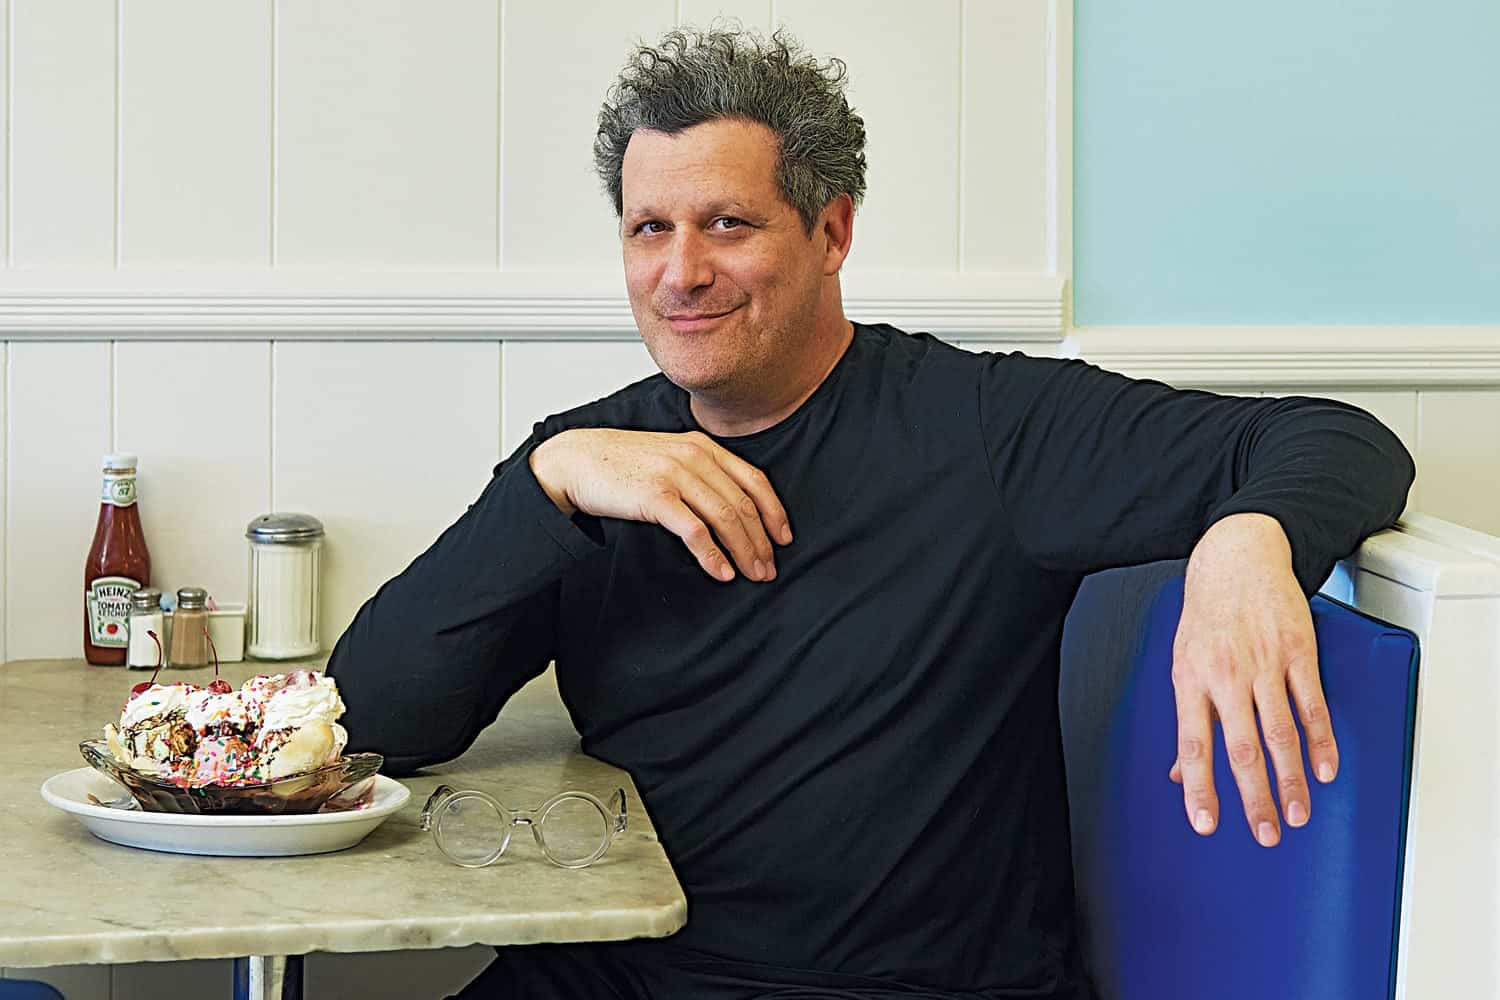 Isaac Mizrahi's New Gig: Cabaret Performer With Terrible Stage Fright